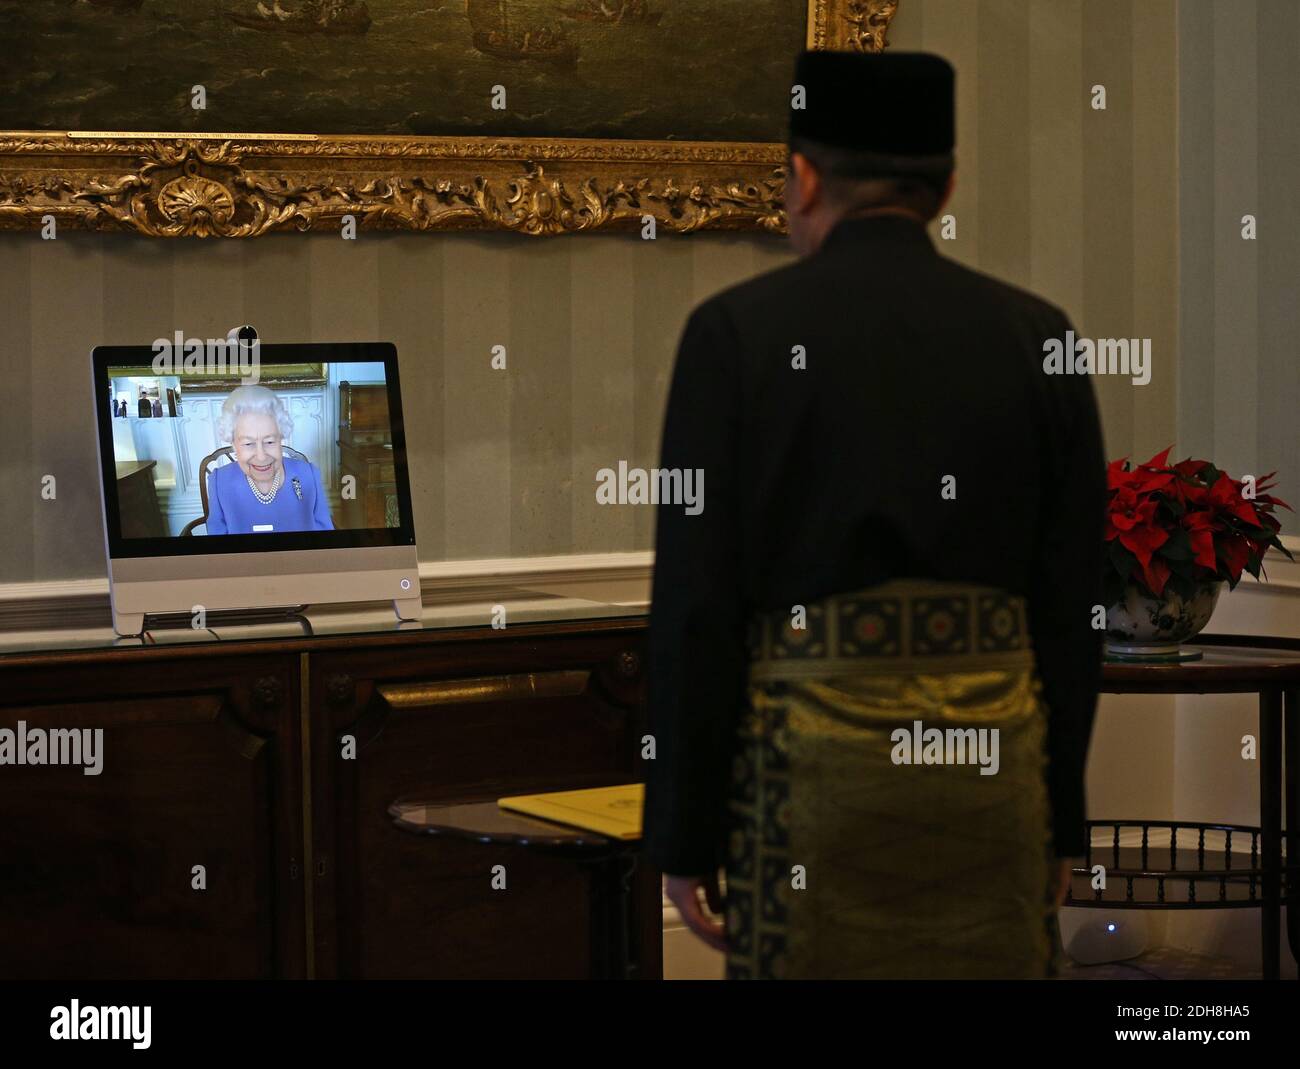 Queen Elizabeth II appears on a screen by videolink from Windsor Castle, where she is in residence, during a virtual audience to receive His Excellency the High Commissioner for Brunei Darussalam First Admiral Pengiran Dato Seri Pahlawan Norazmi bin Pengiran Haji Muhammad, who was at London's Buckingham Palace. Stock Photo